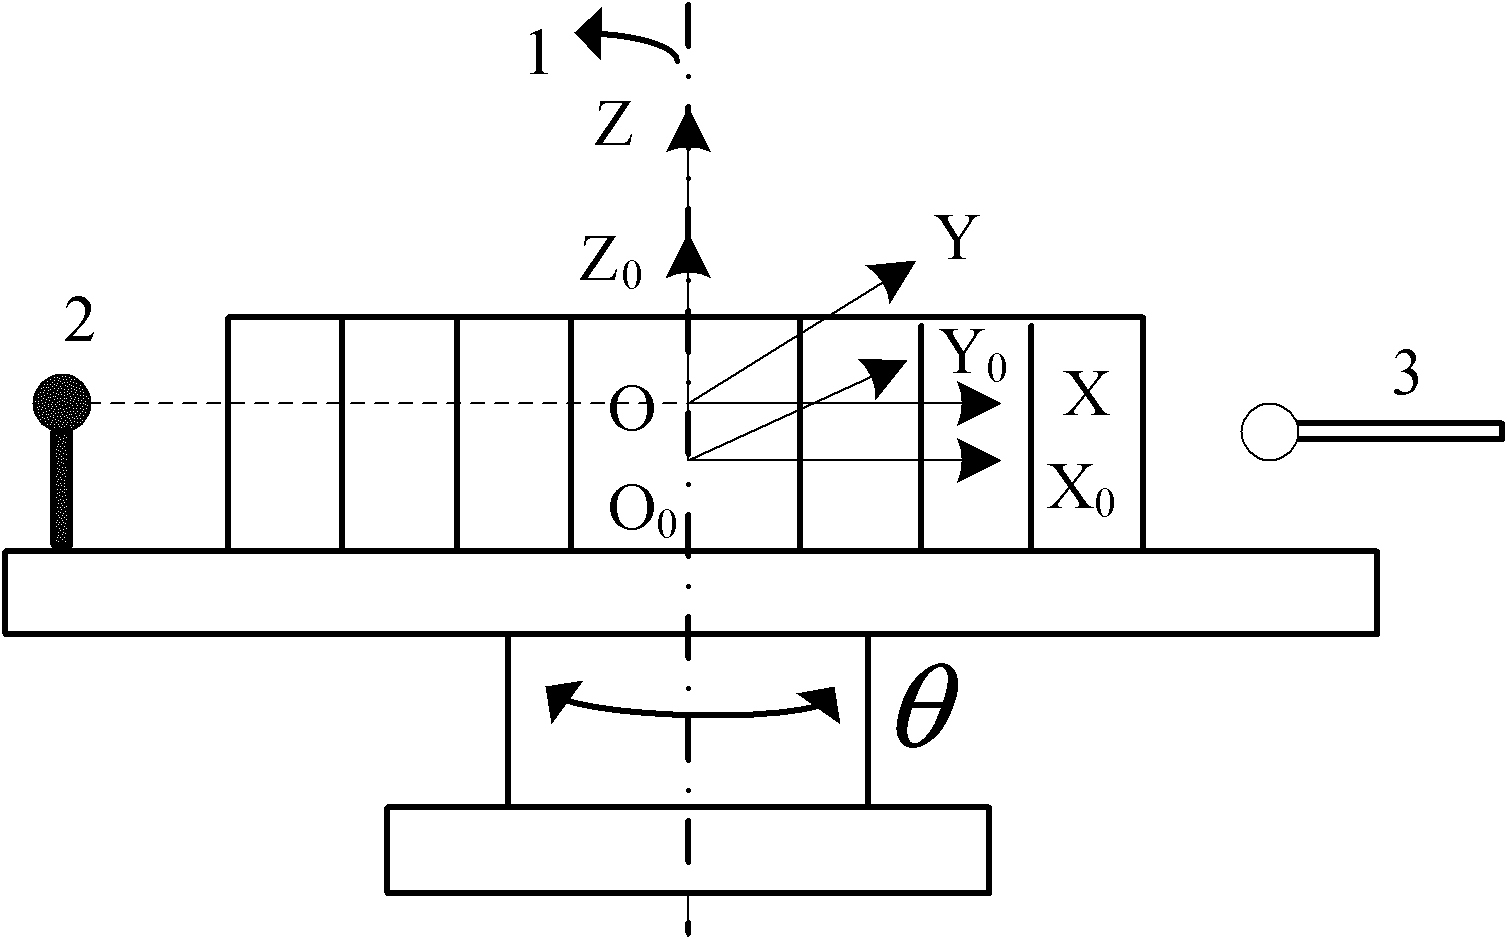 Fitting eccentric error compensating method based on CNC (Computerized Numerical Control) gear measuring center